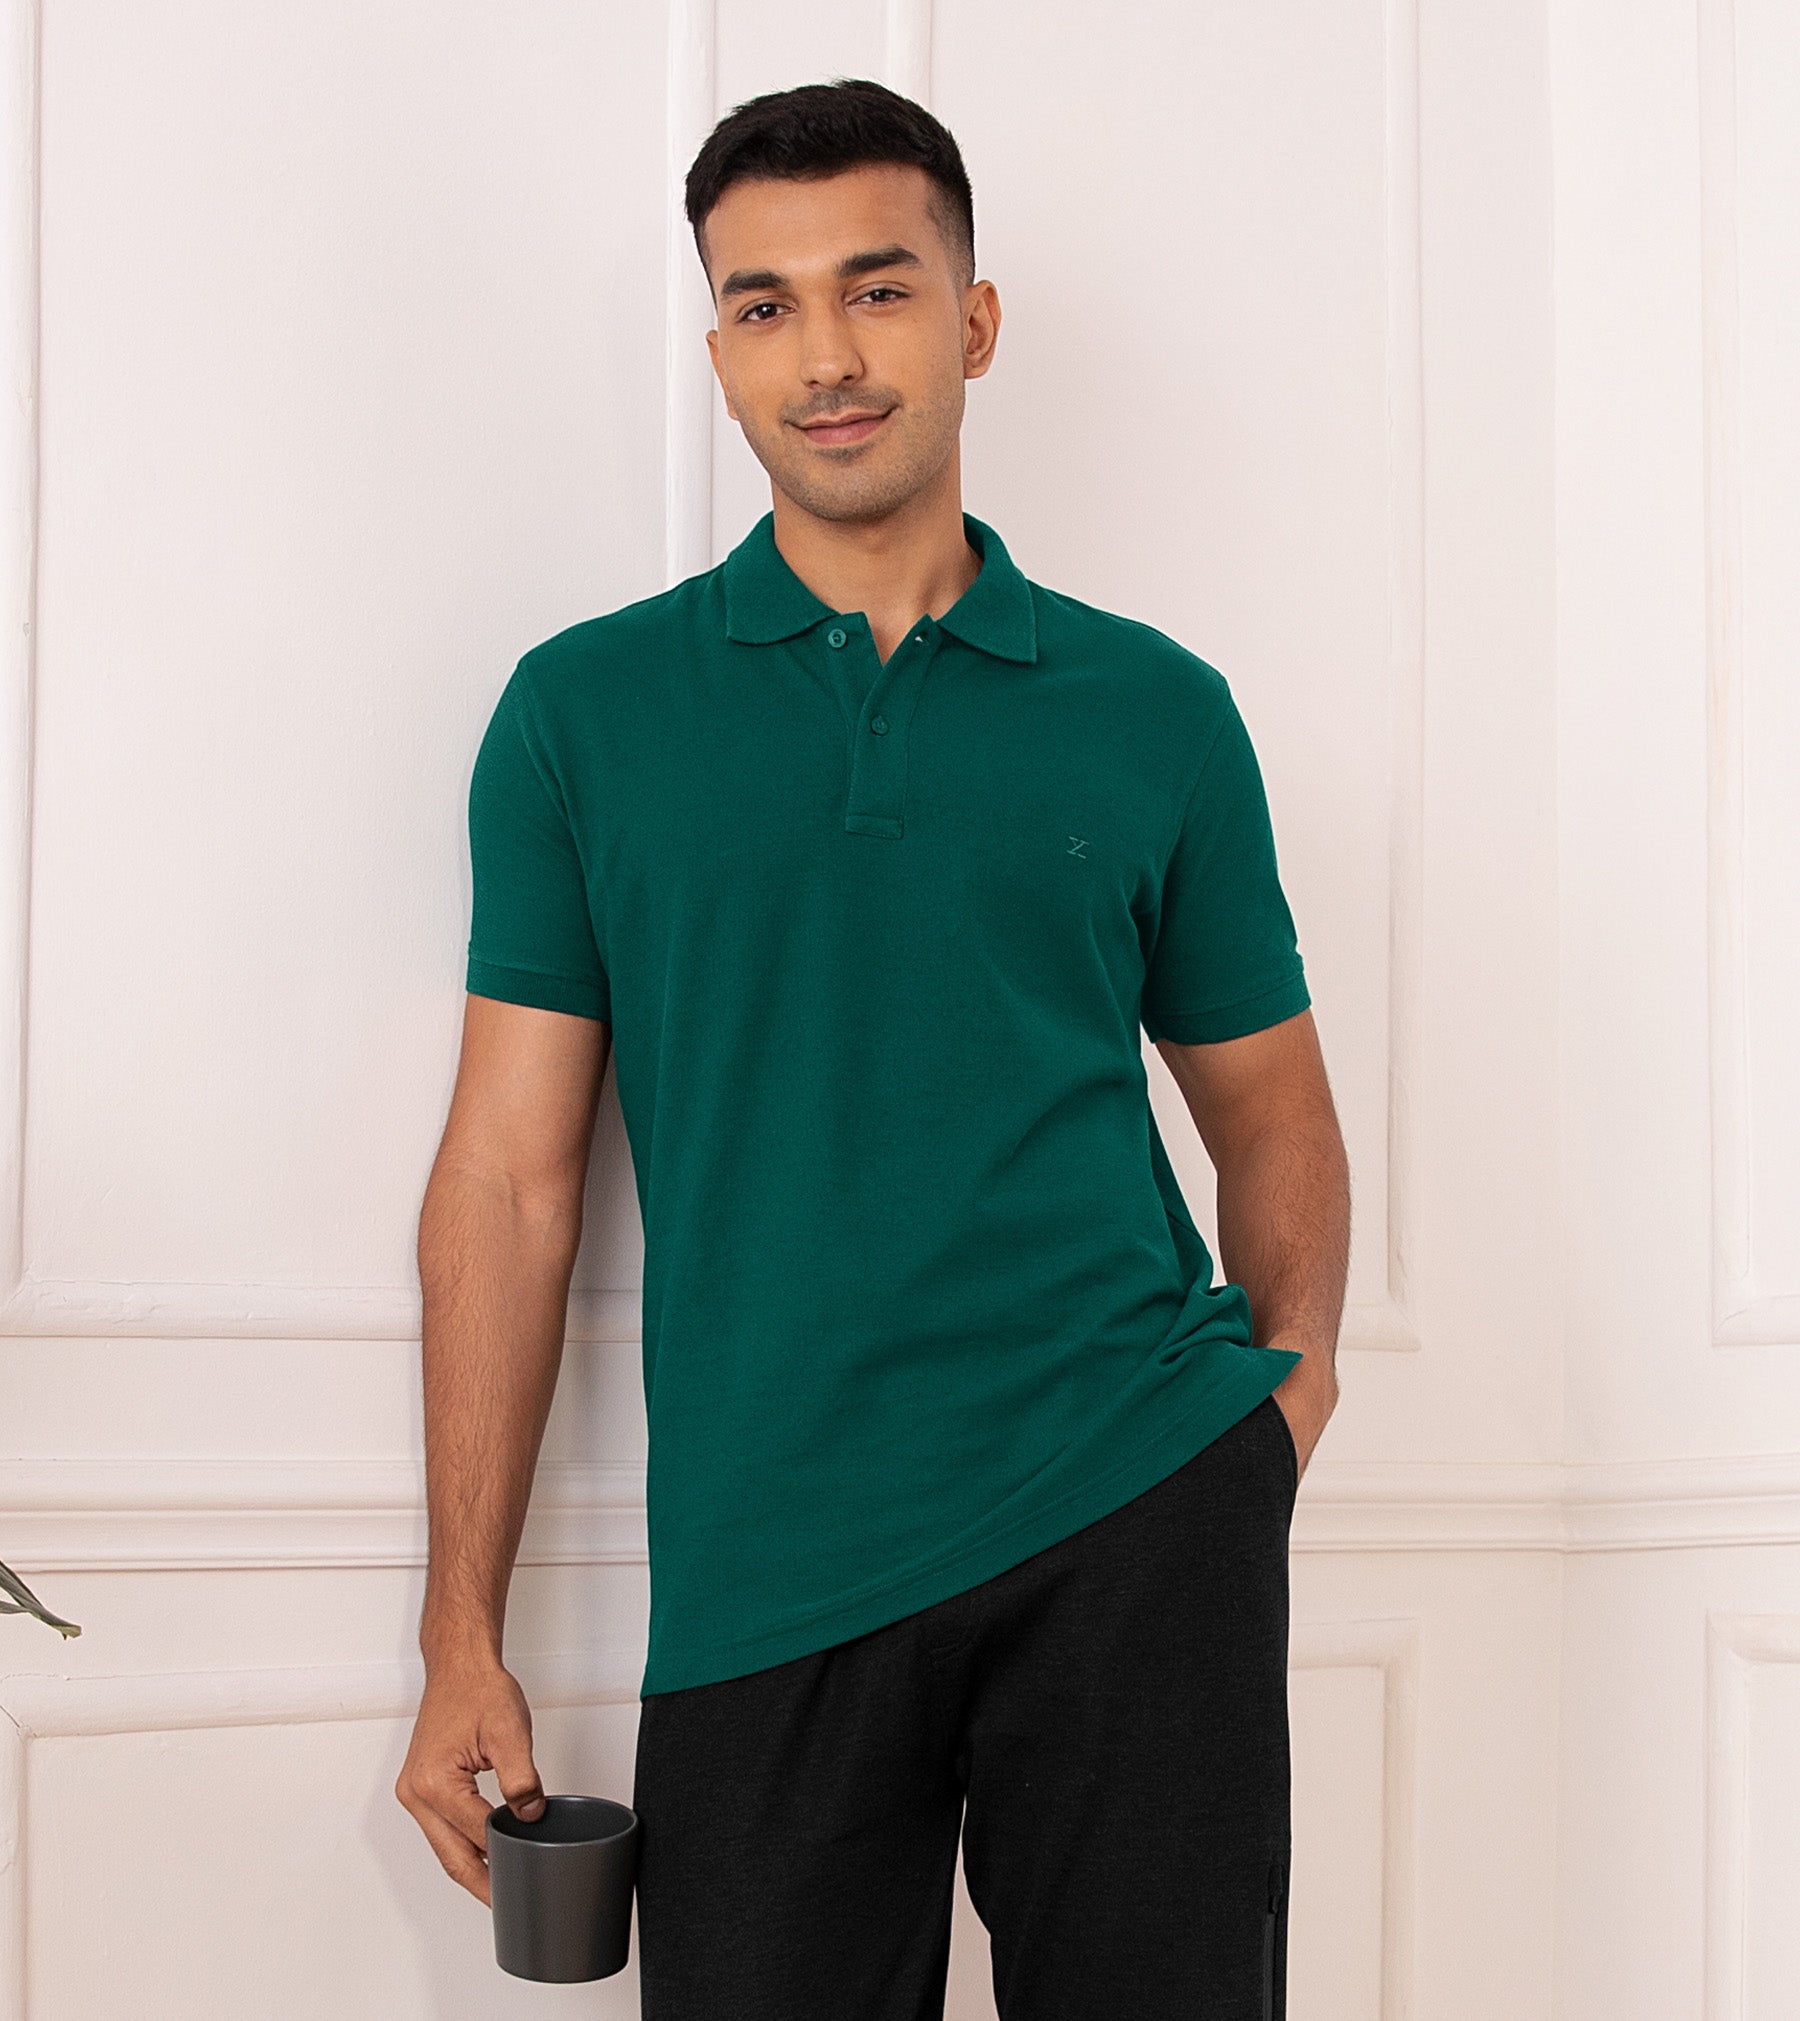 POLO TEE PT06 (V-Neck Tipping Collar) – 6 Colors (Unisex) - T Shirt 2 u /  Online T-Shirts printing, uniform Printing, Embroidery, Silk Screen, DTG  Printing